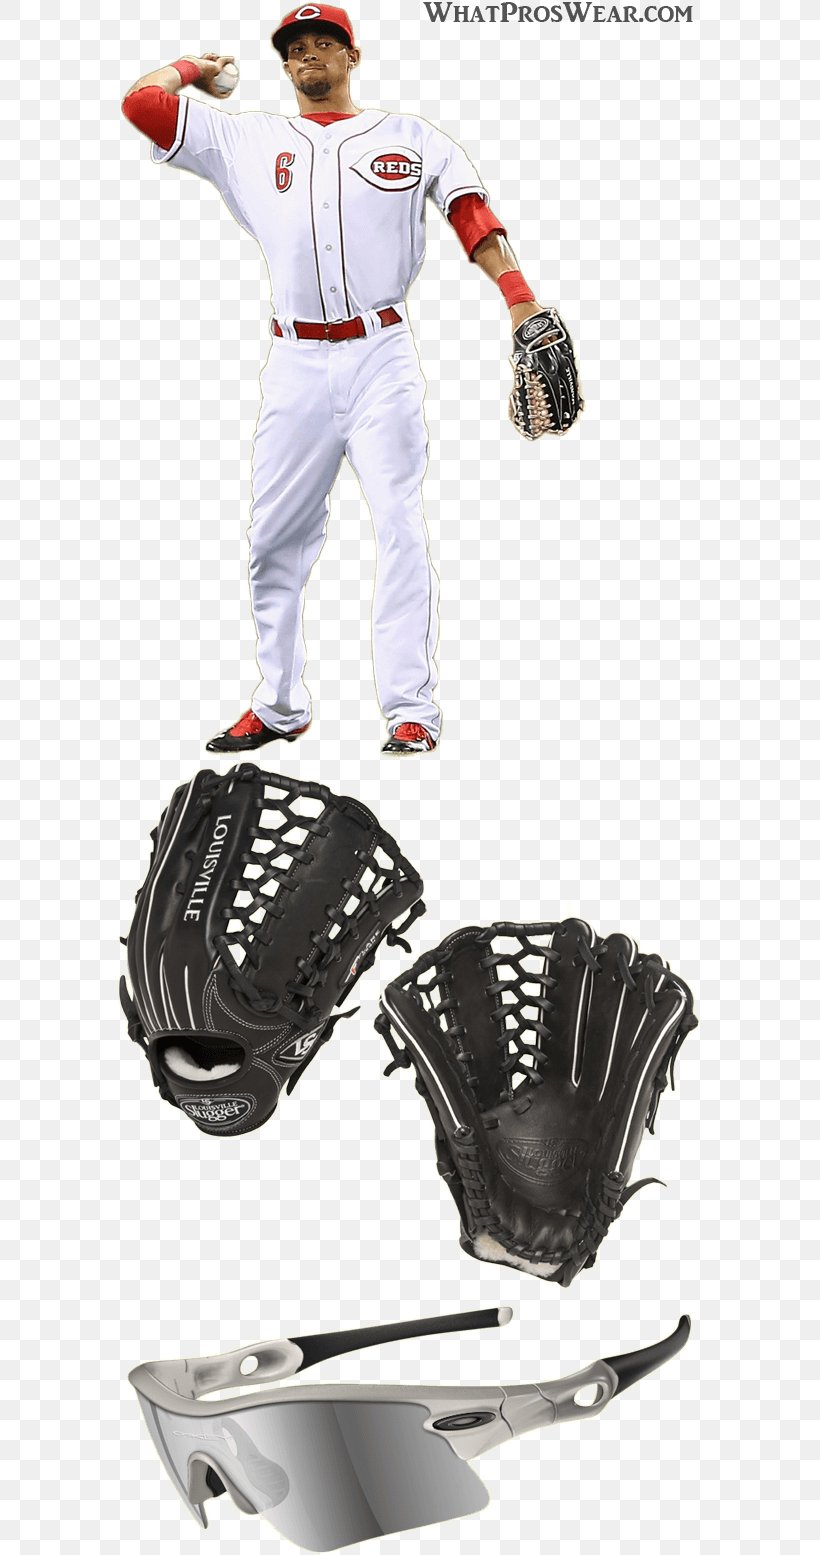 Protective Gear In Sports Baseball Glove Outfielder Hillerich & Bradsby, PNG, 583x1555px, Protective Gear In Sports, Baseball, Baseball Bats, Baseball Equipment, Baseball Glove Download Free